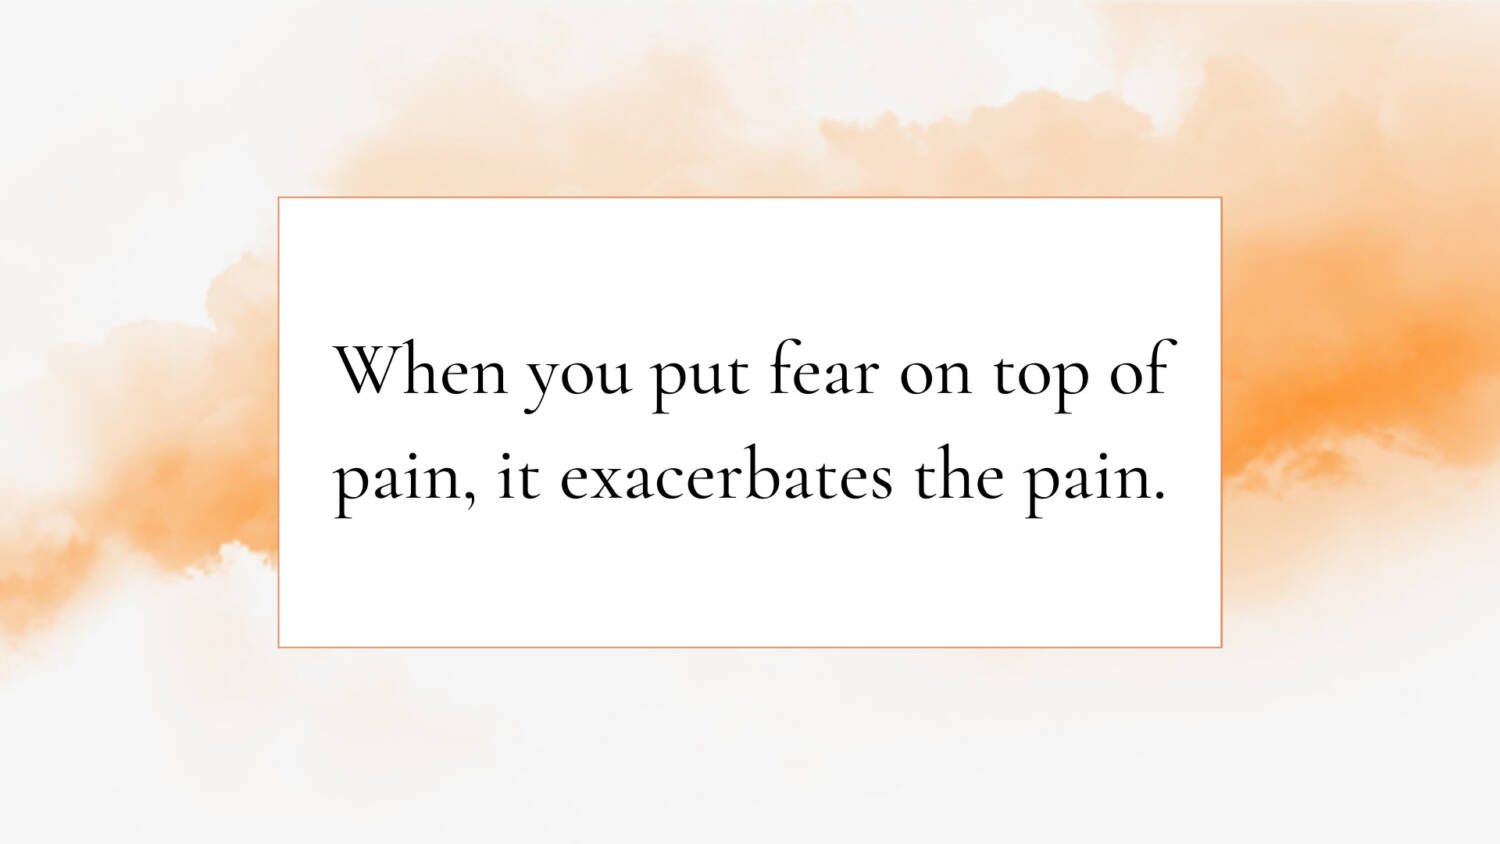 When you put fear on top of pain, it exacerbates the pain.